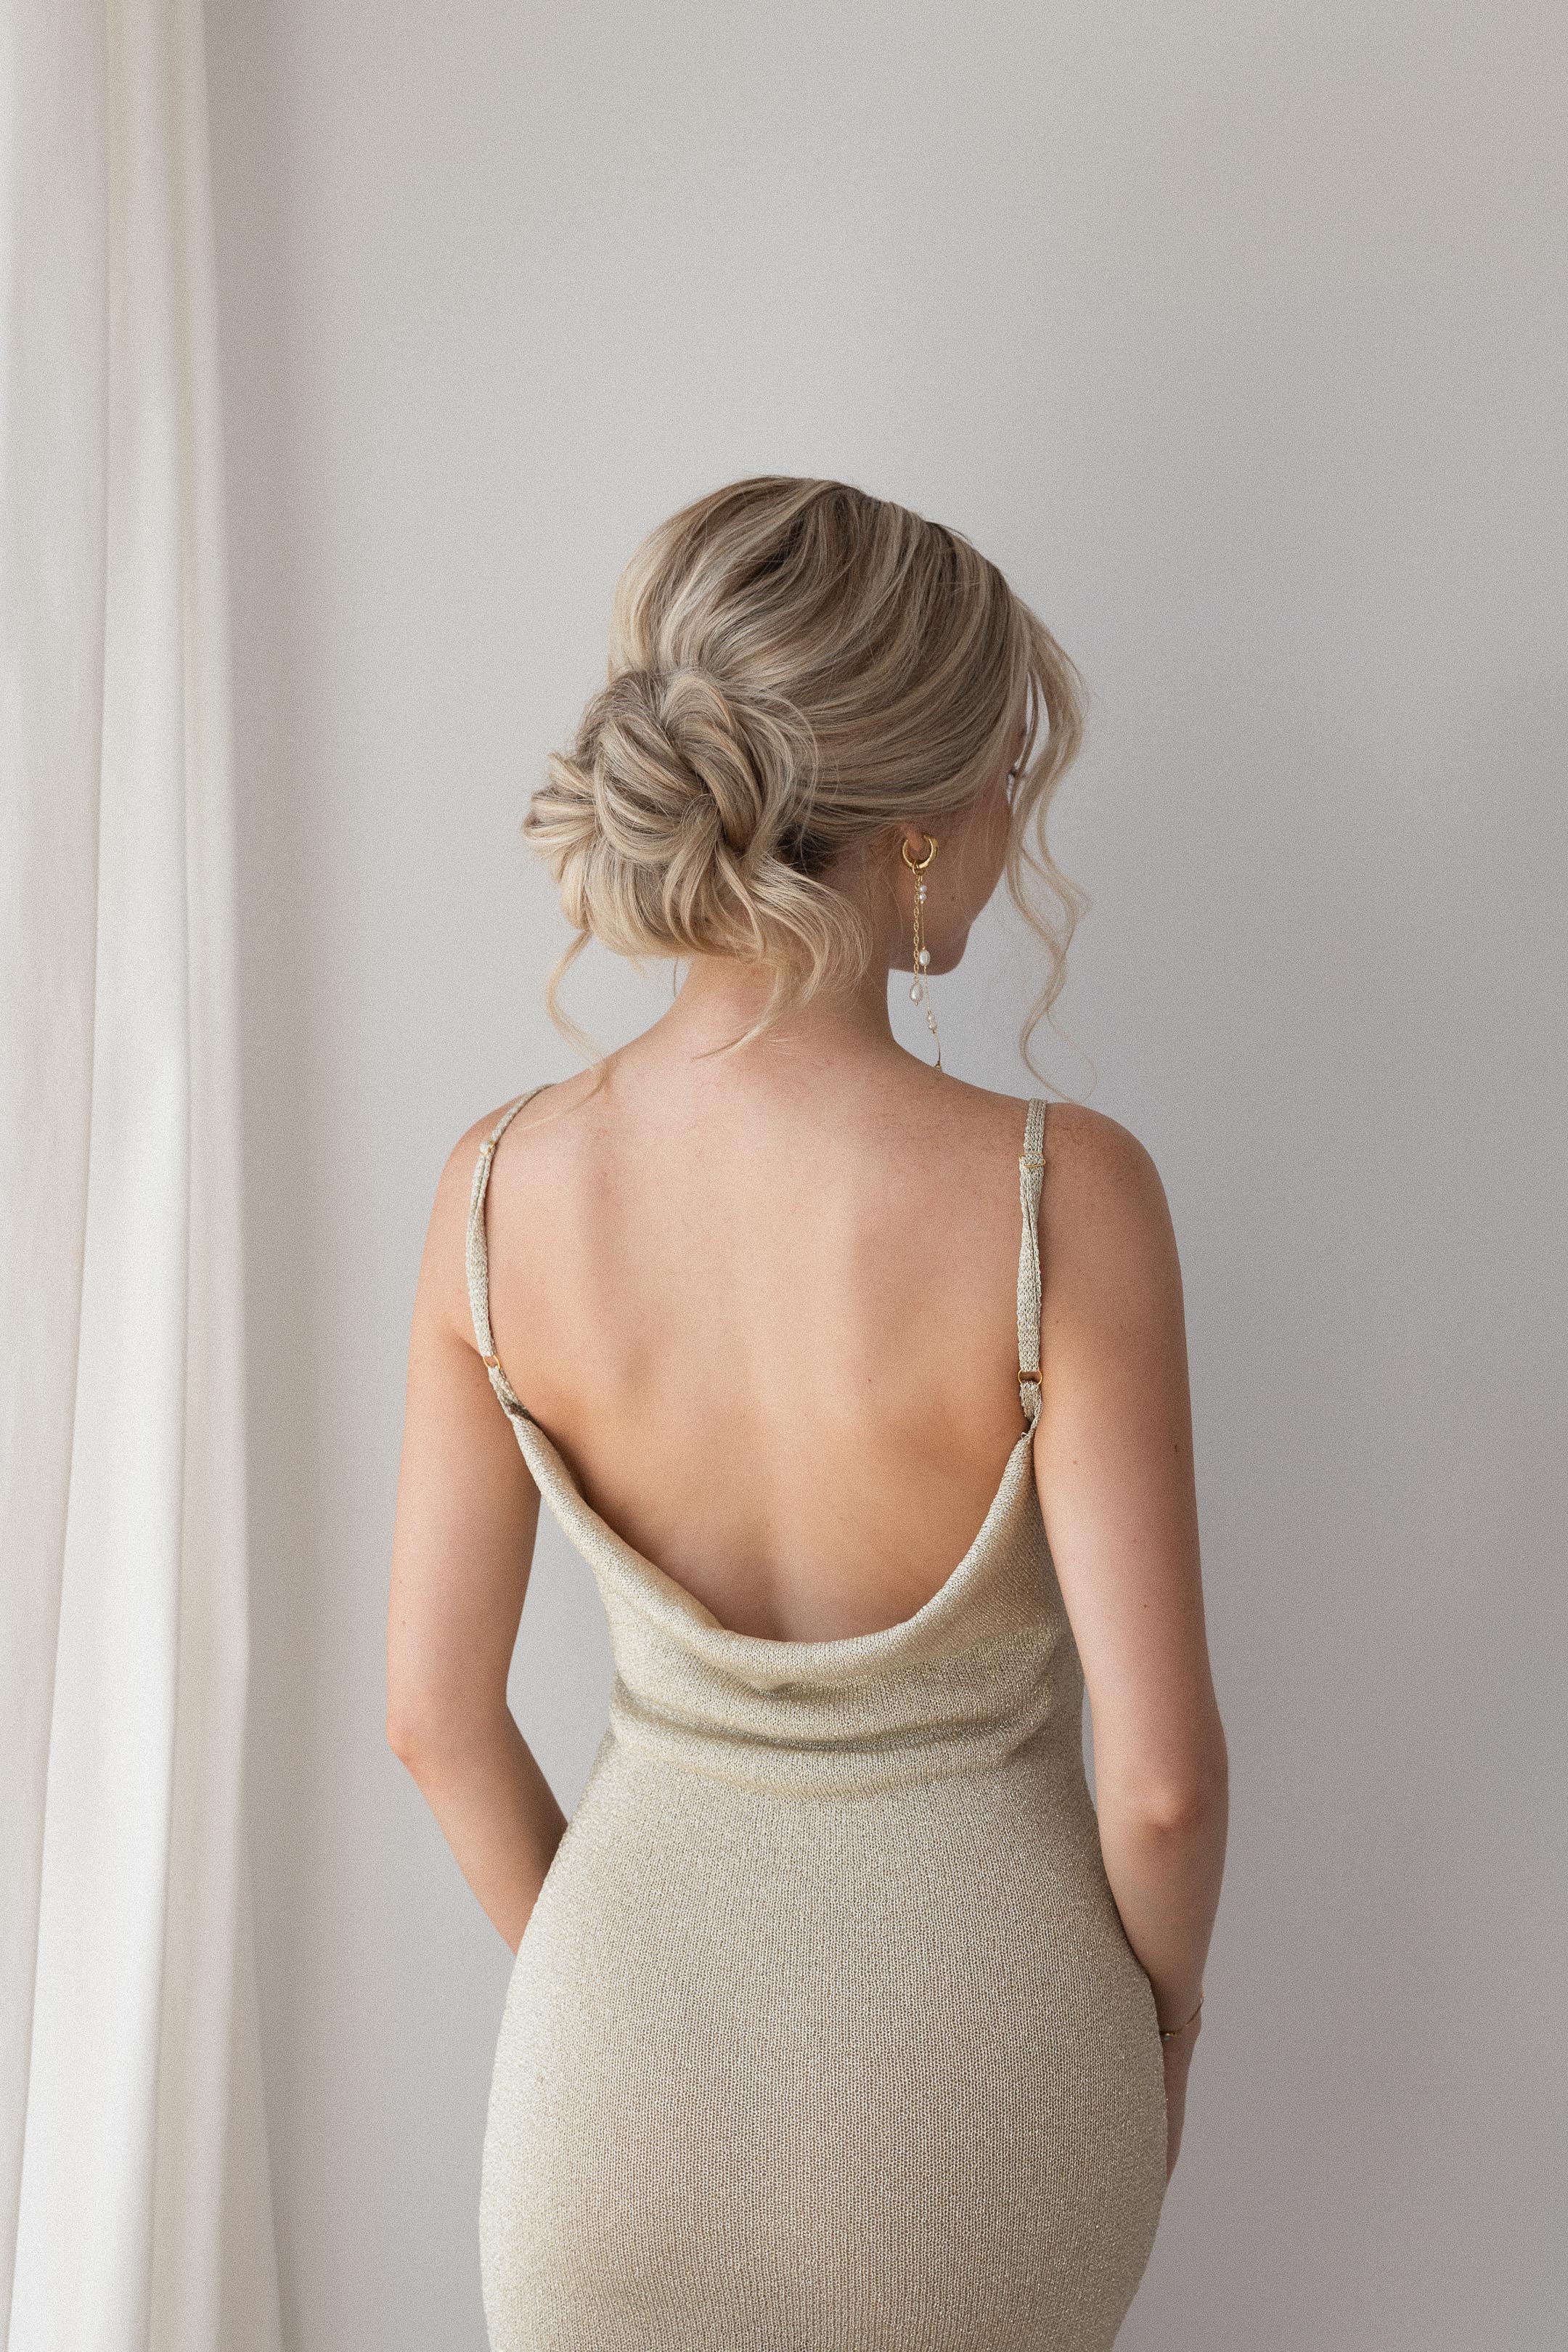 Top 20 Half Up Half Down Wedding Hairstyles - Oh The Wedding Day